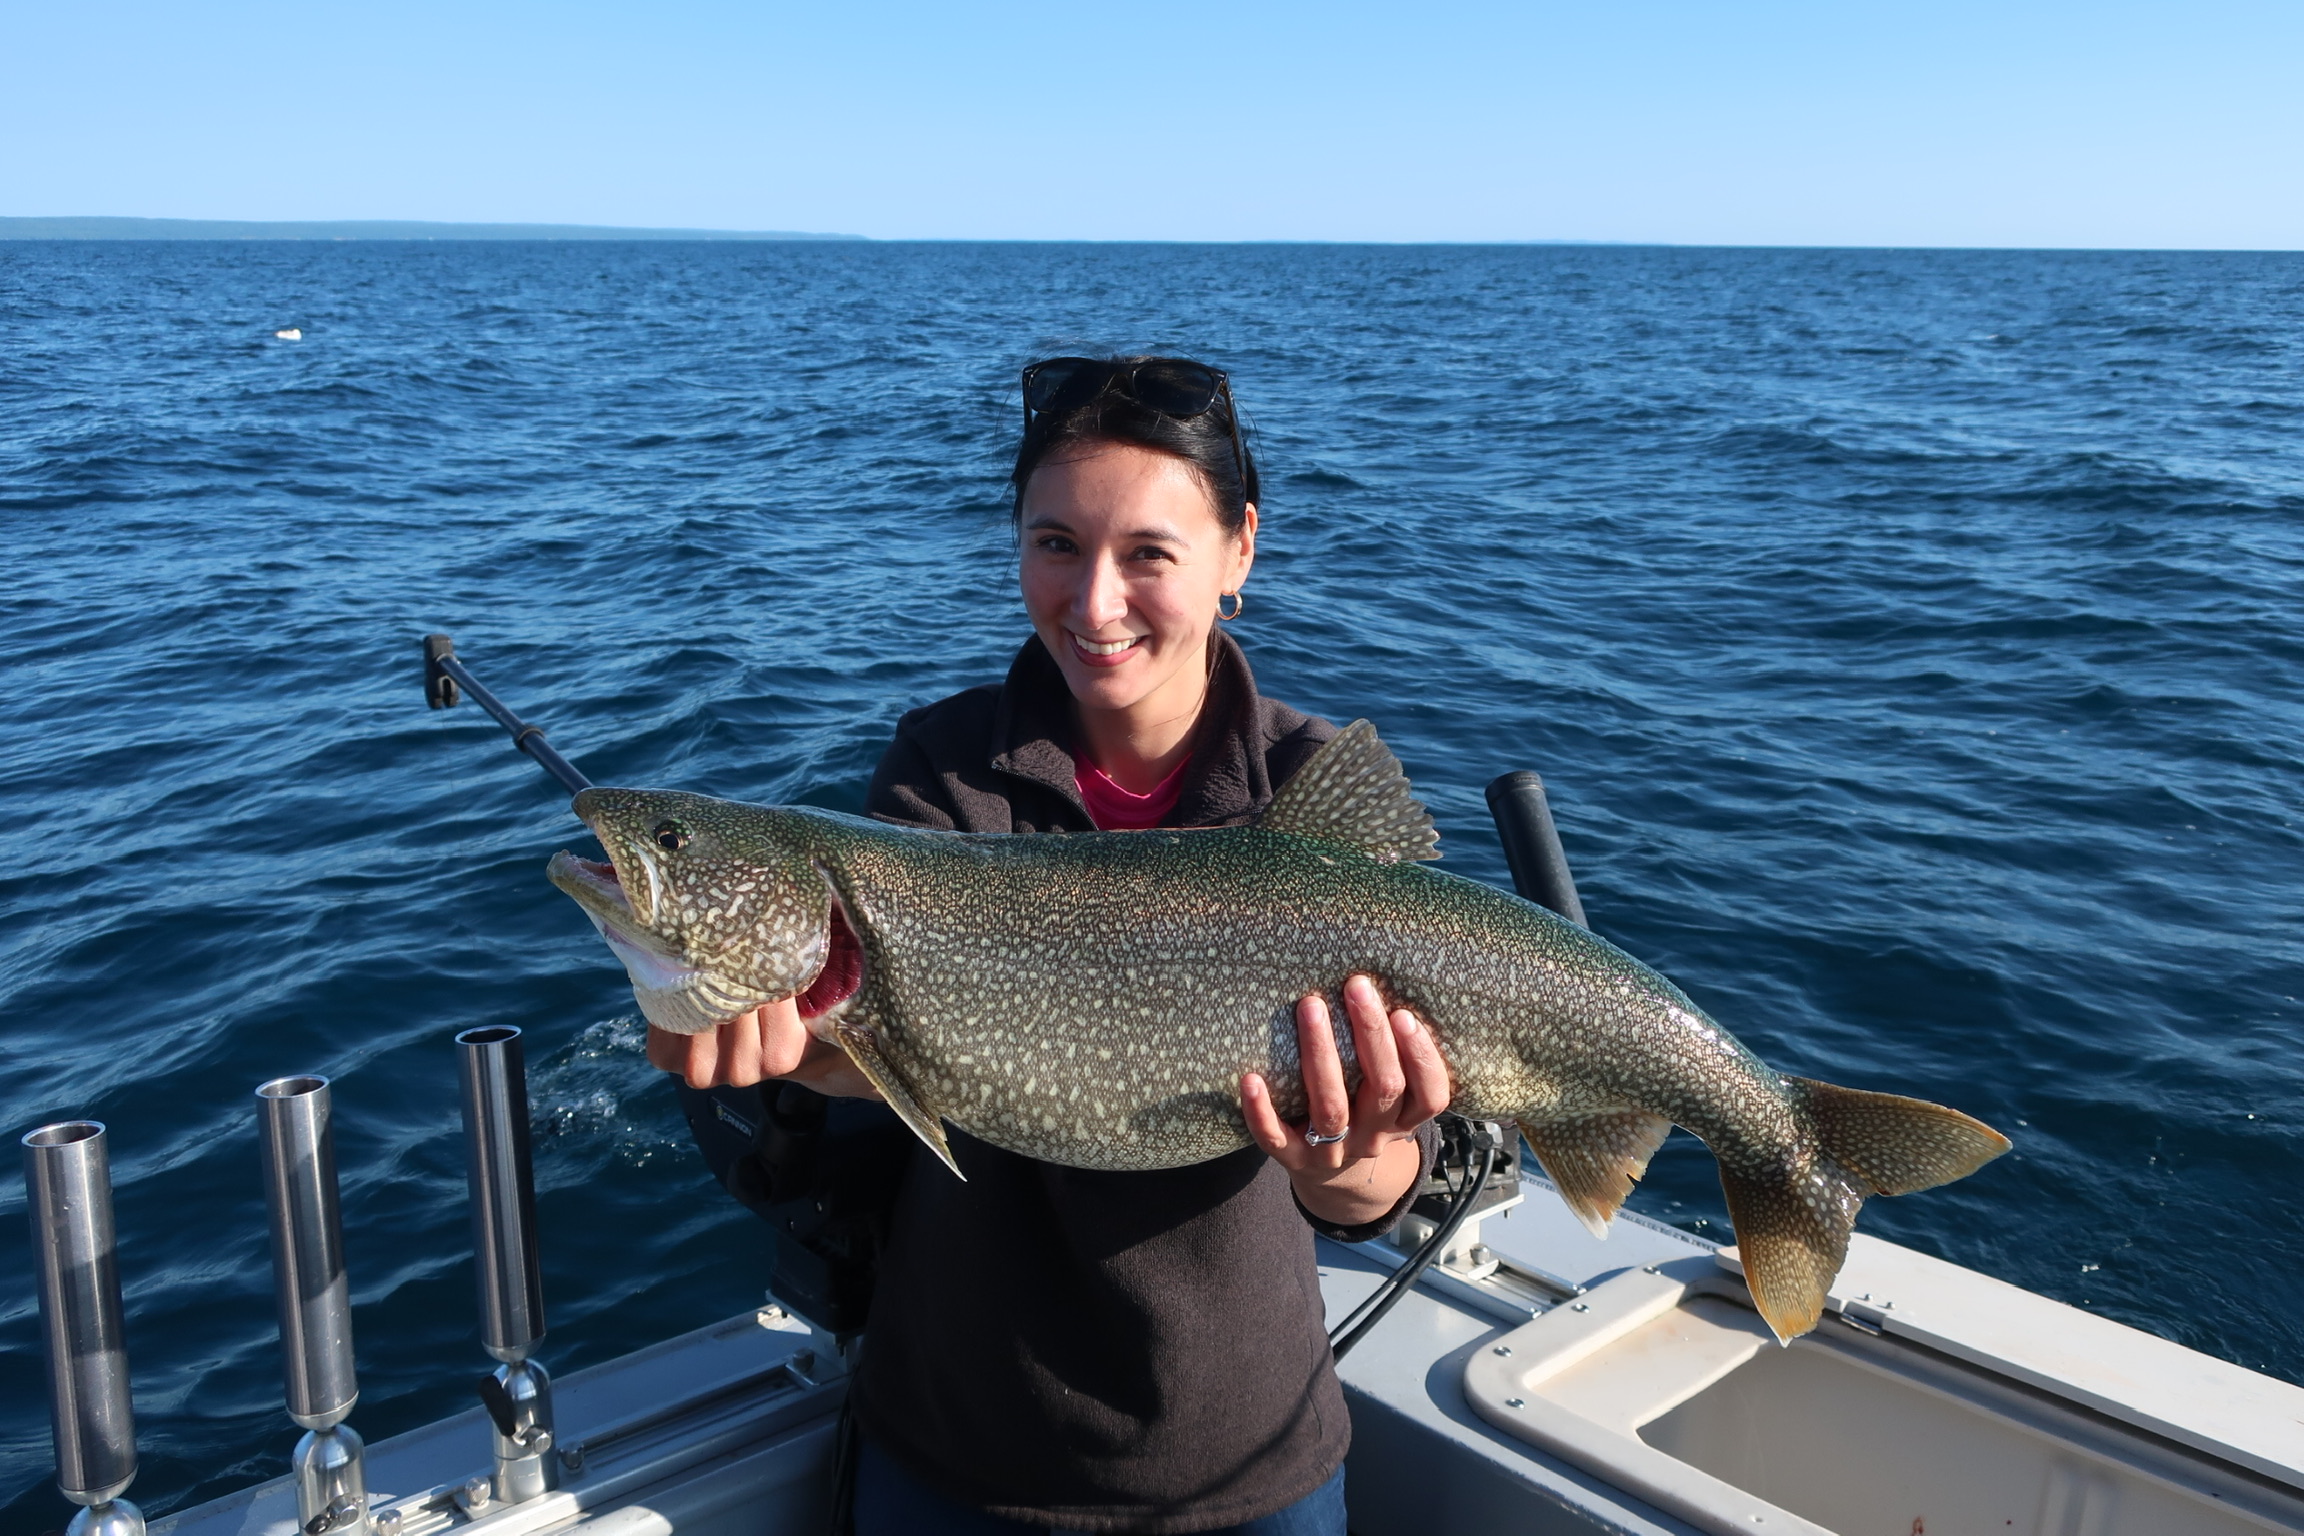 You are currently viewing Mackinac Island, Michigan: Charter Fishing on the Great Lakes